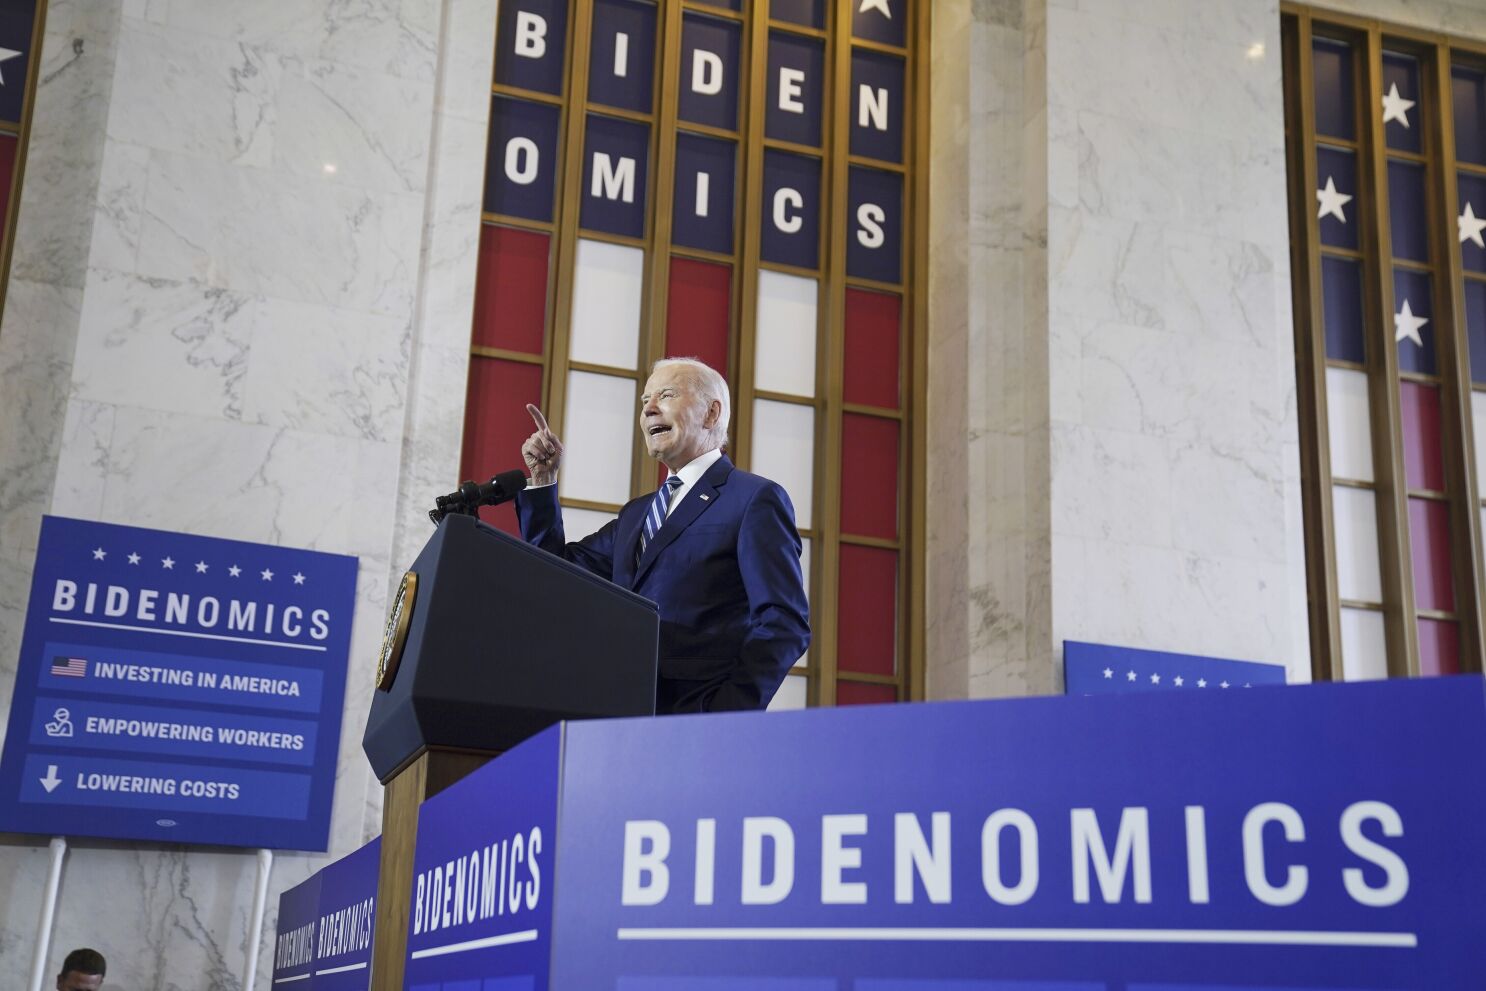 Fitch Ratings Downgrade of USA Credit Rating a Blow to Bidenomics